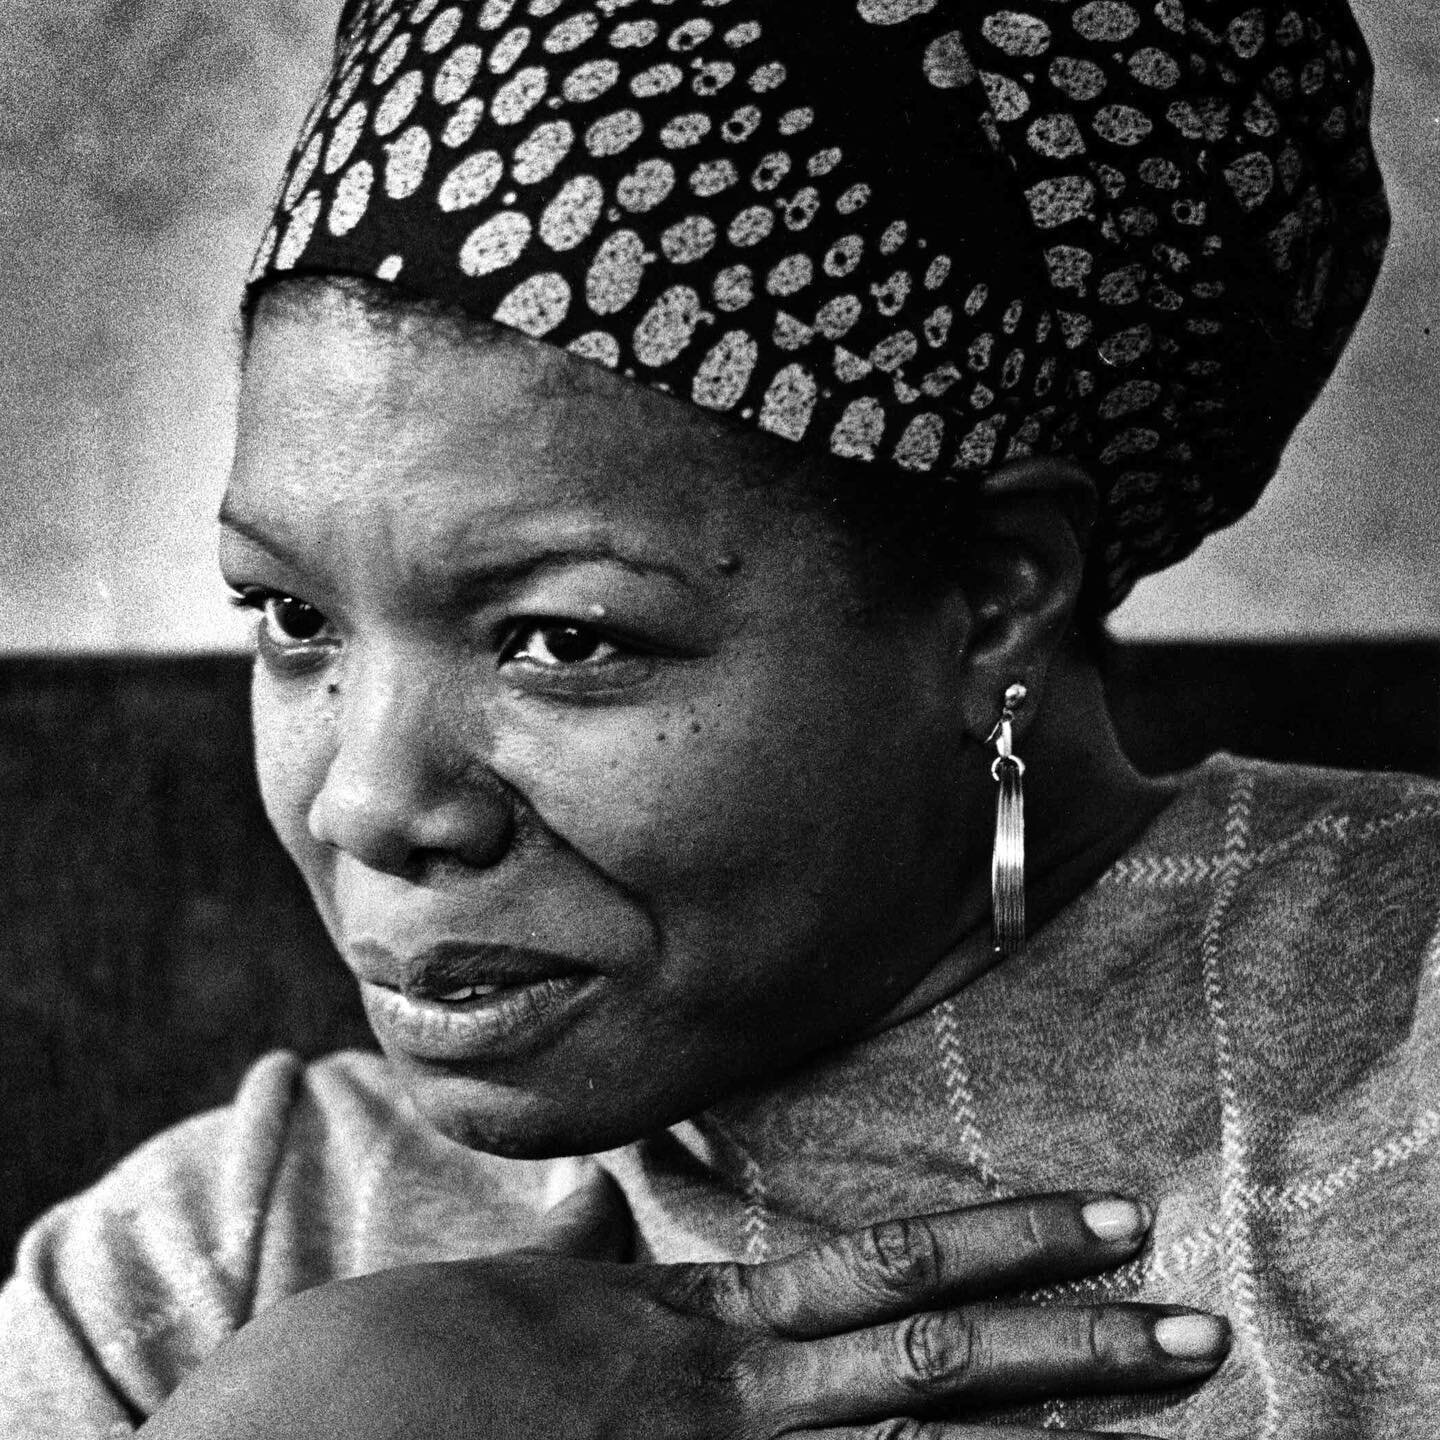 Maya Angelou (born Marguerite Annie Johnson; April 4, 1928&nbsp;&ndash; May 28, 2014) was an American poet, memoirist, and civil rights activist. She published seven autobiographies, three books of essays, several books of poetry, and is credited wit